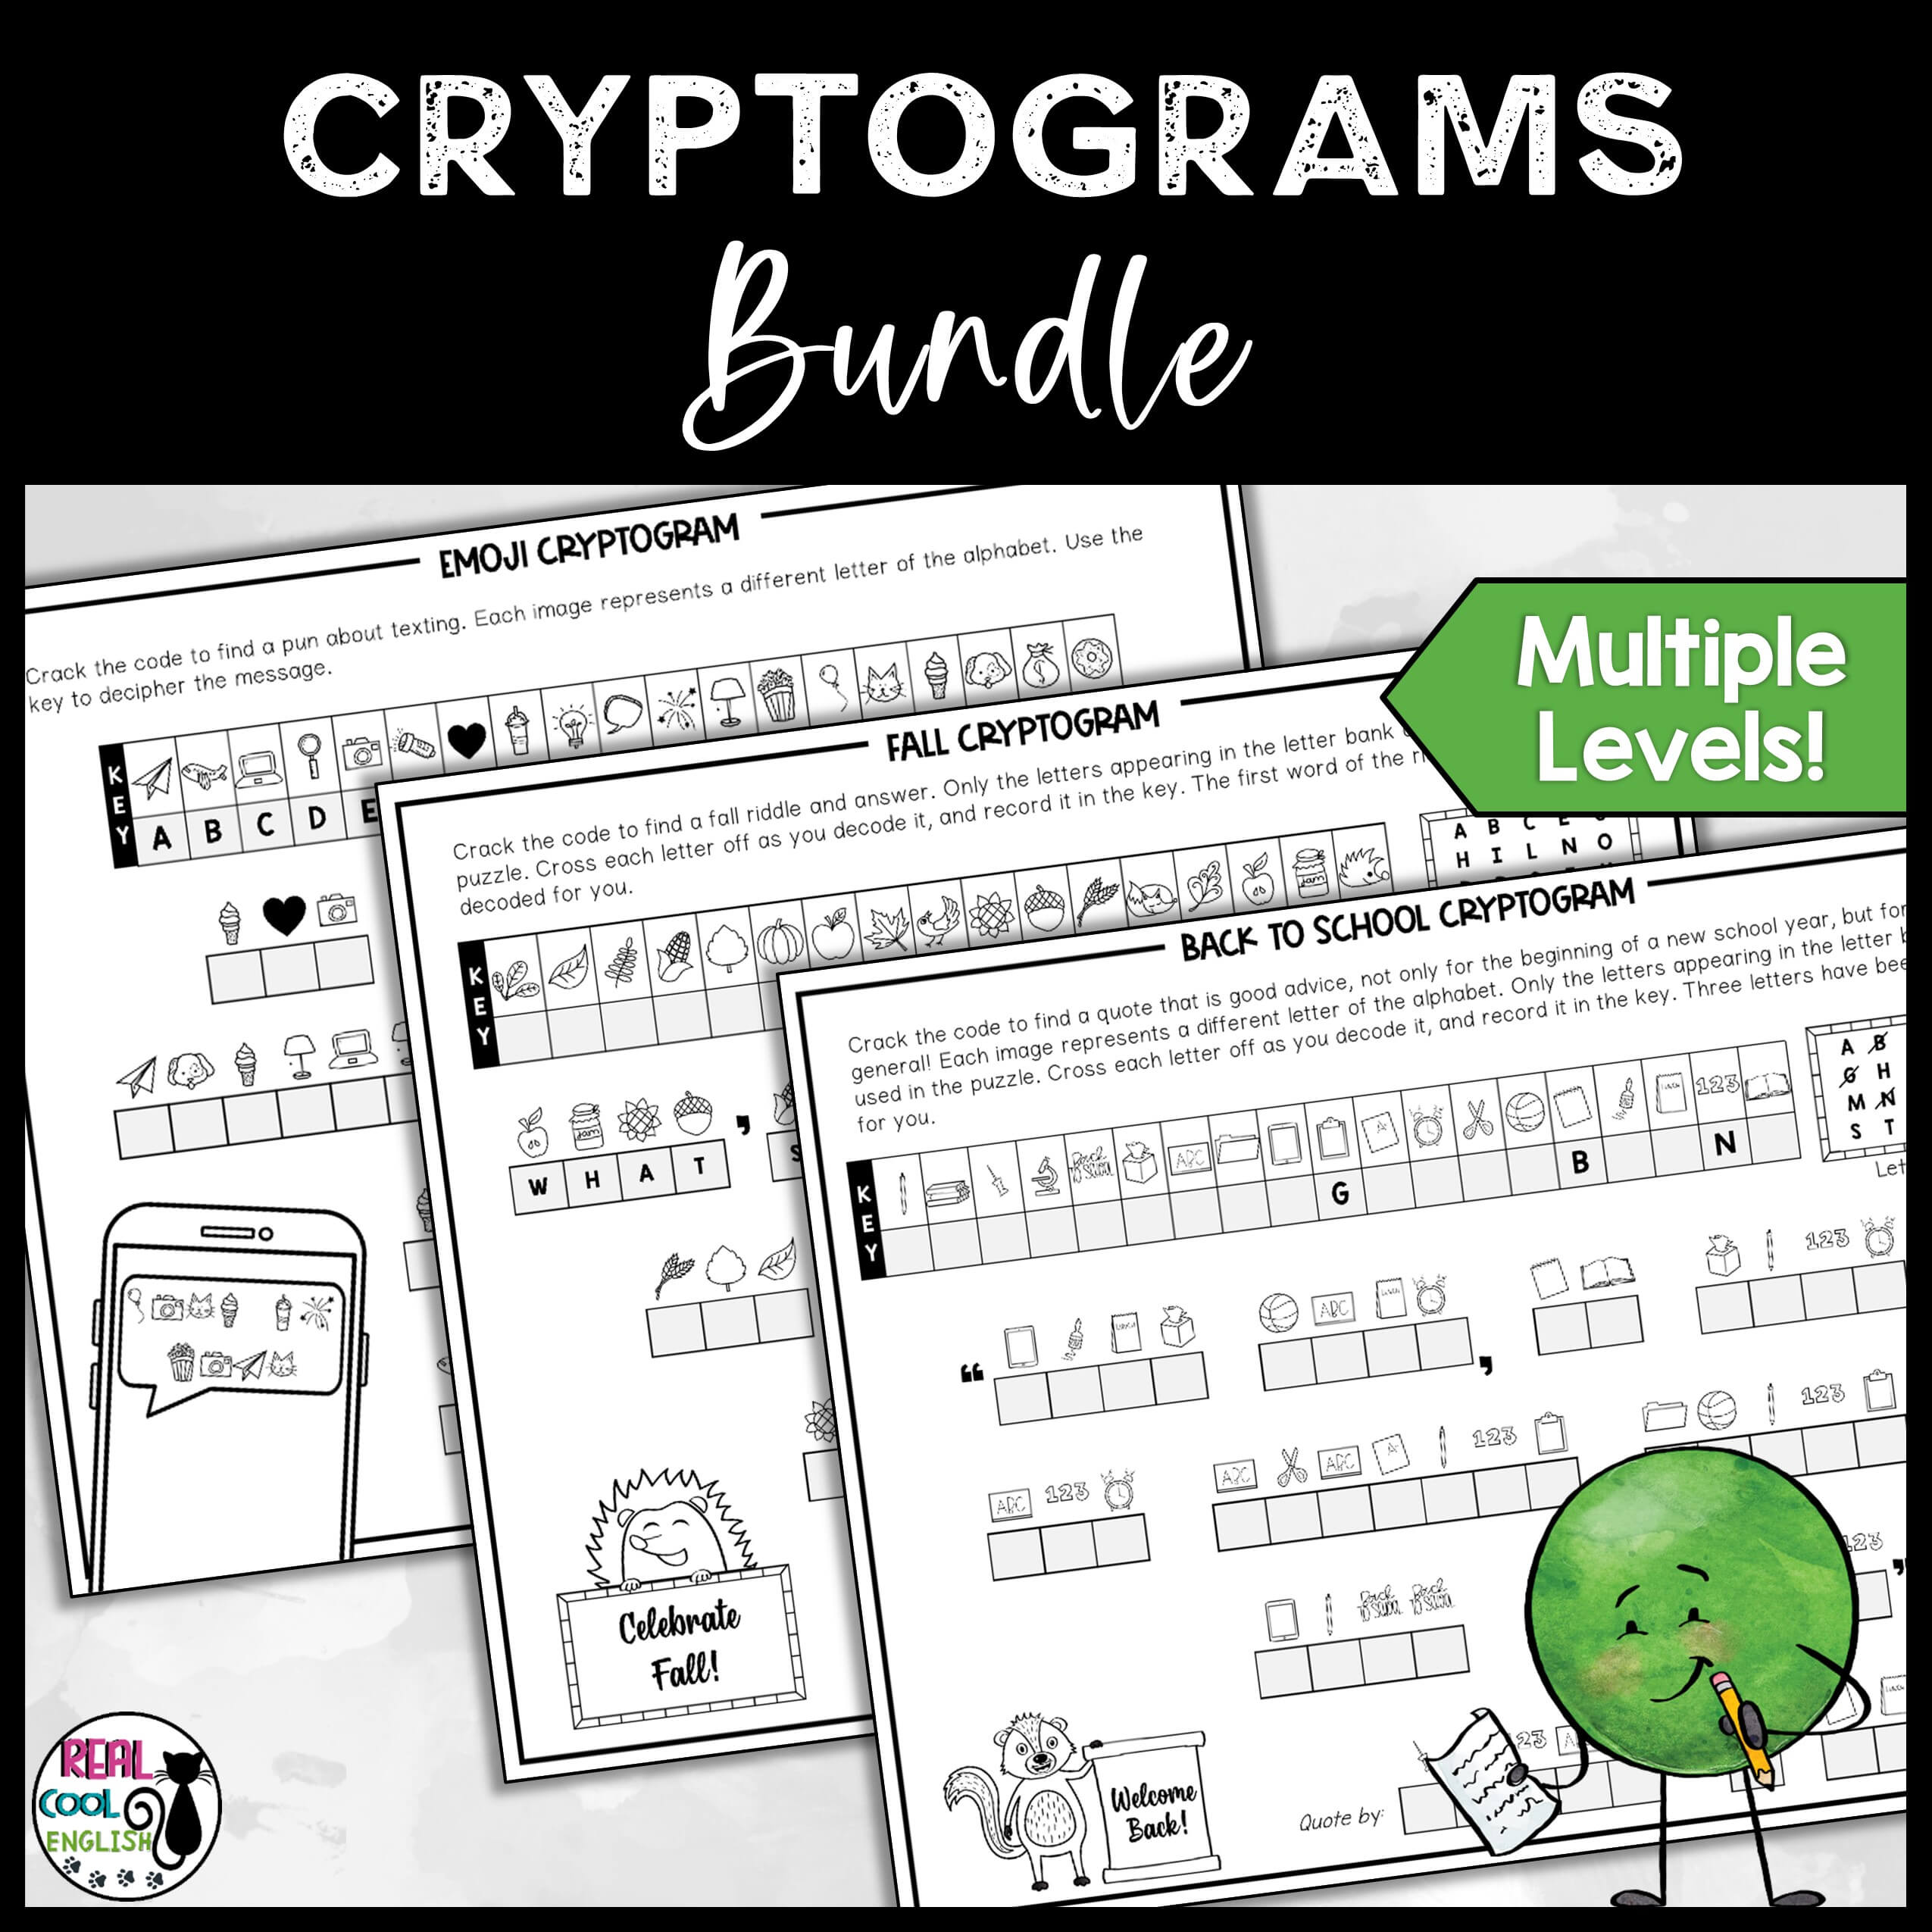 Cryptograms puzzles for spelling and logic skills